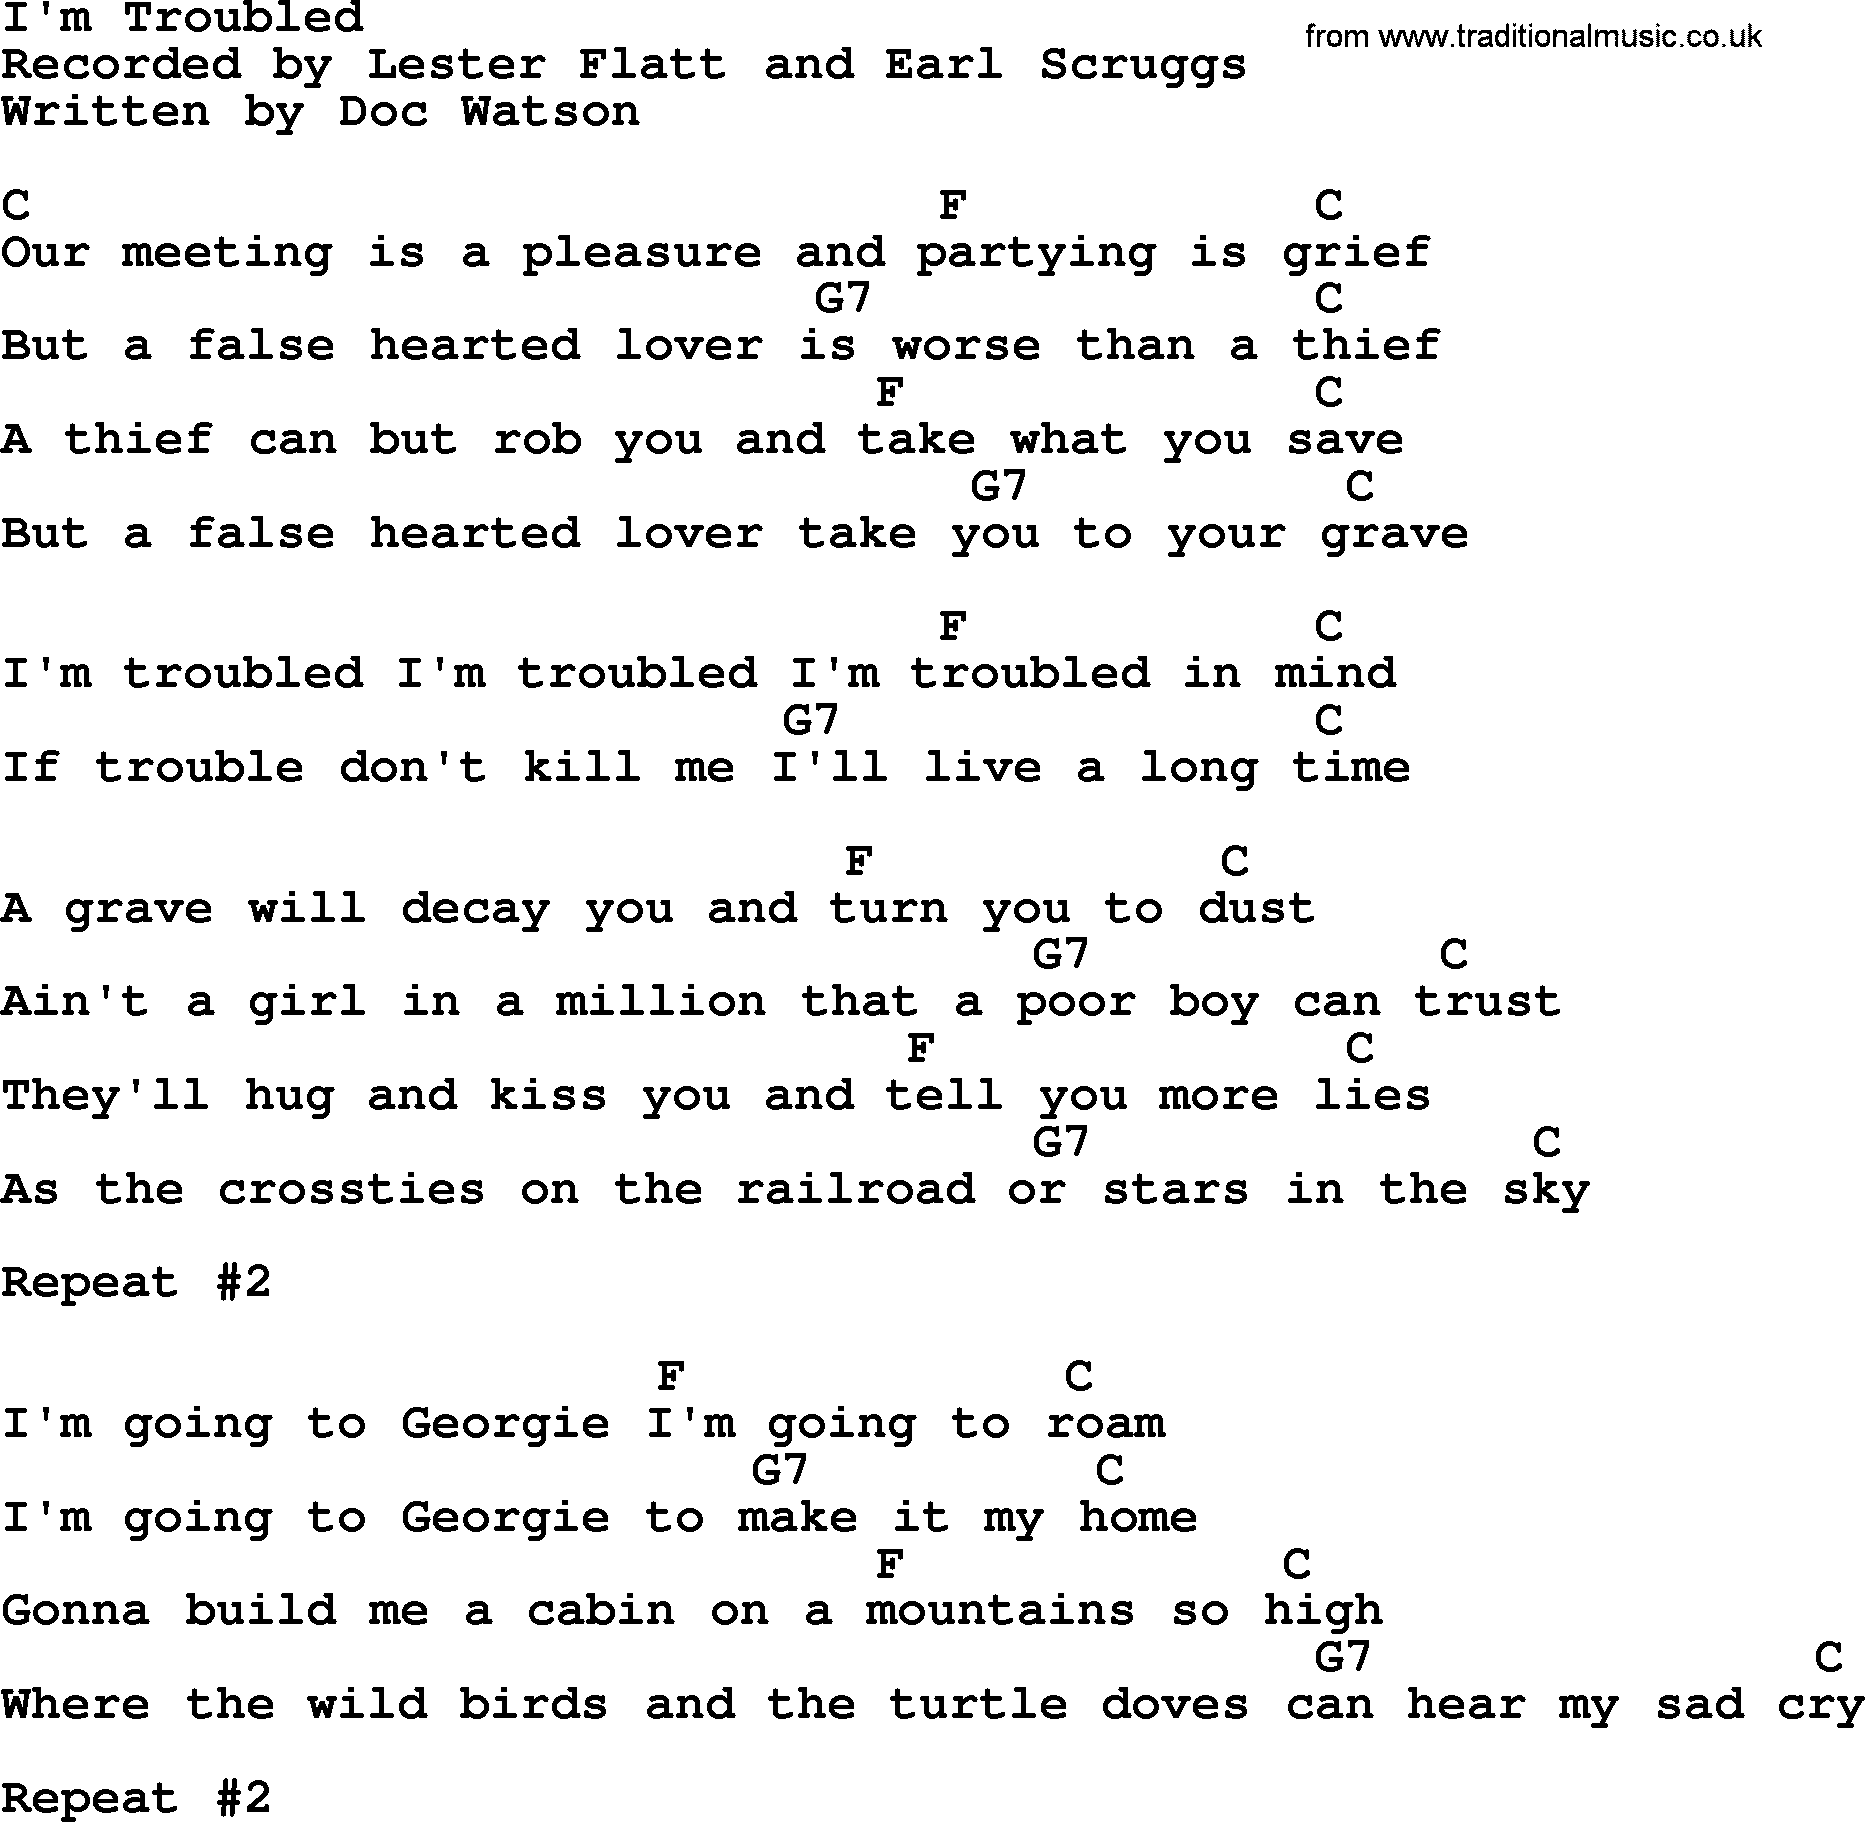 Bluegrass song: I'm Troubled, lyrics and chords